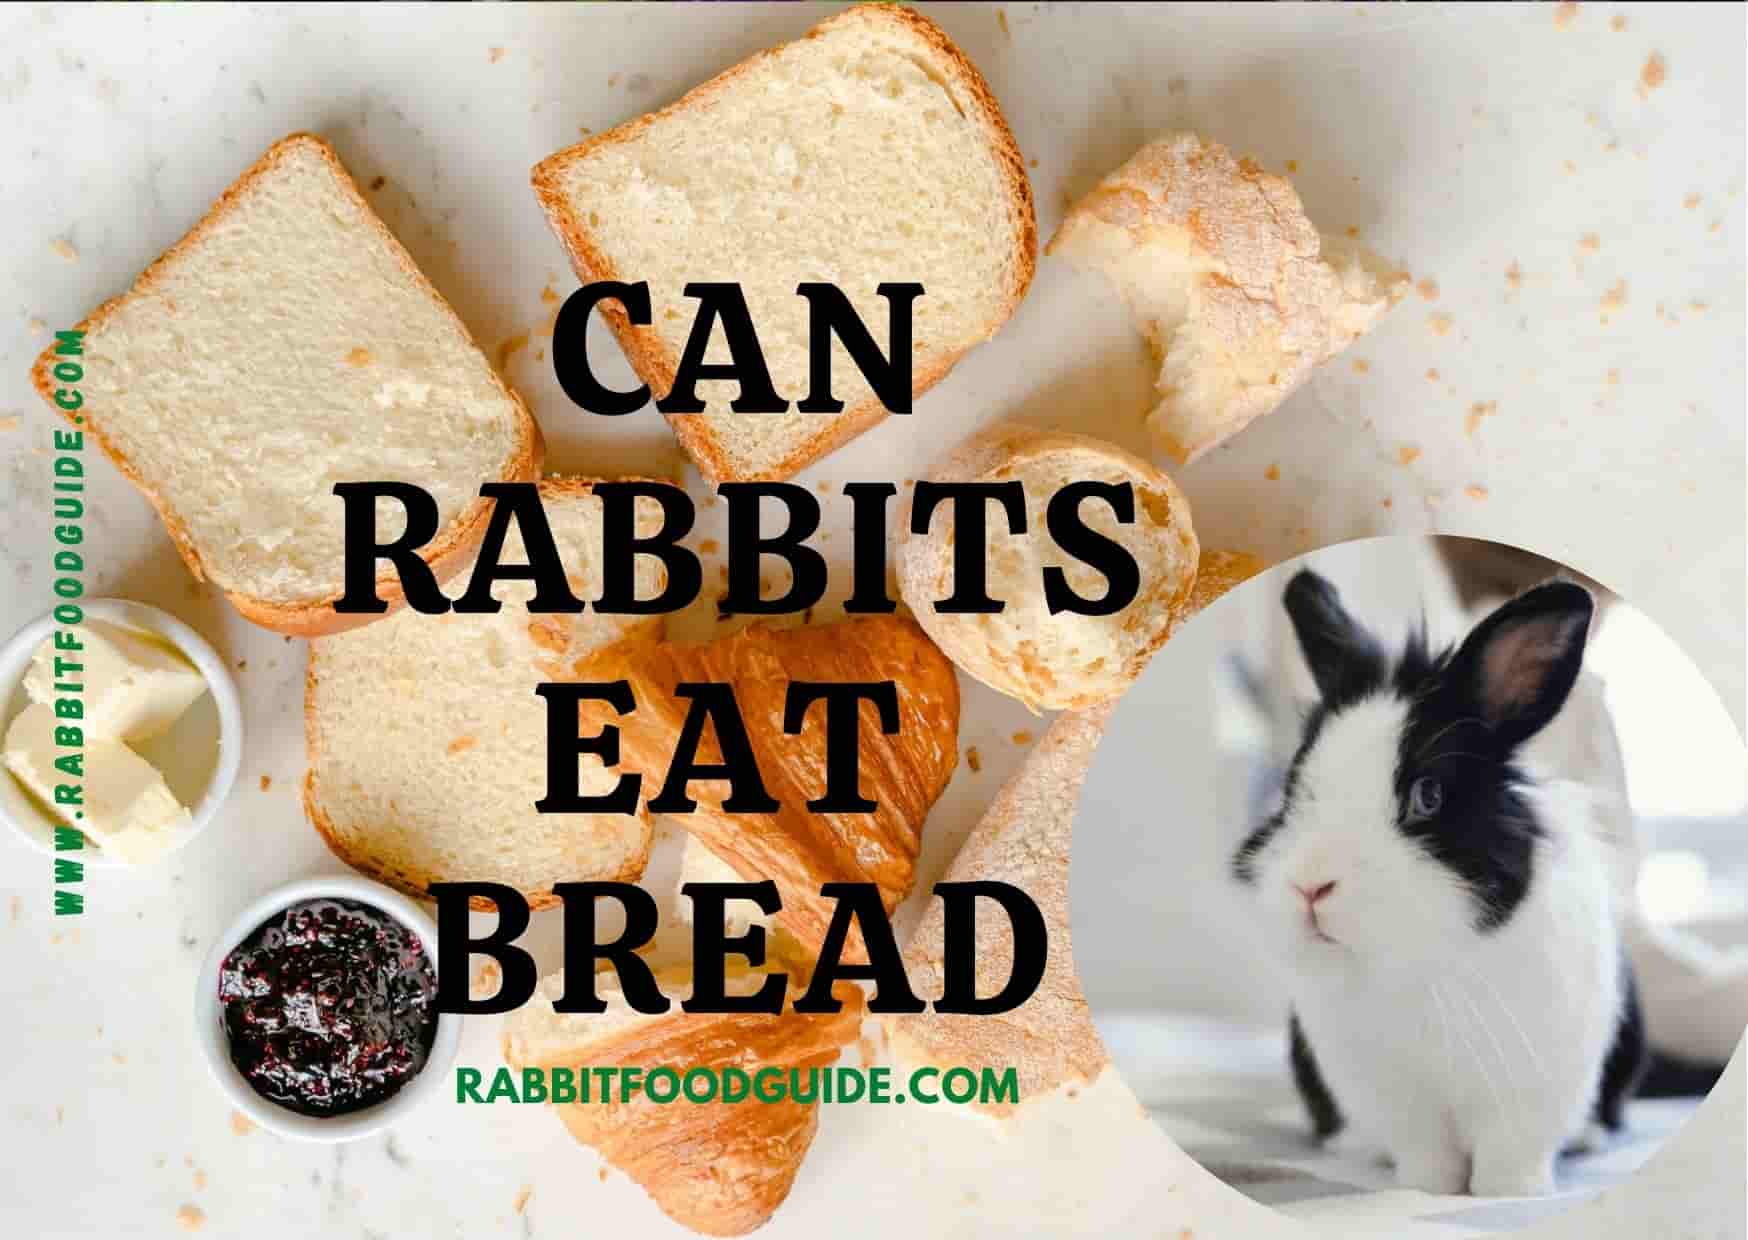 can rabbits eat bread?